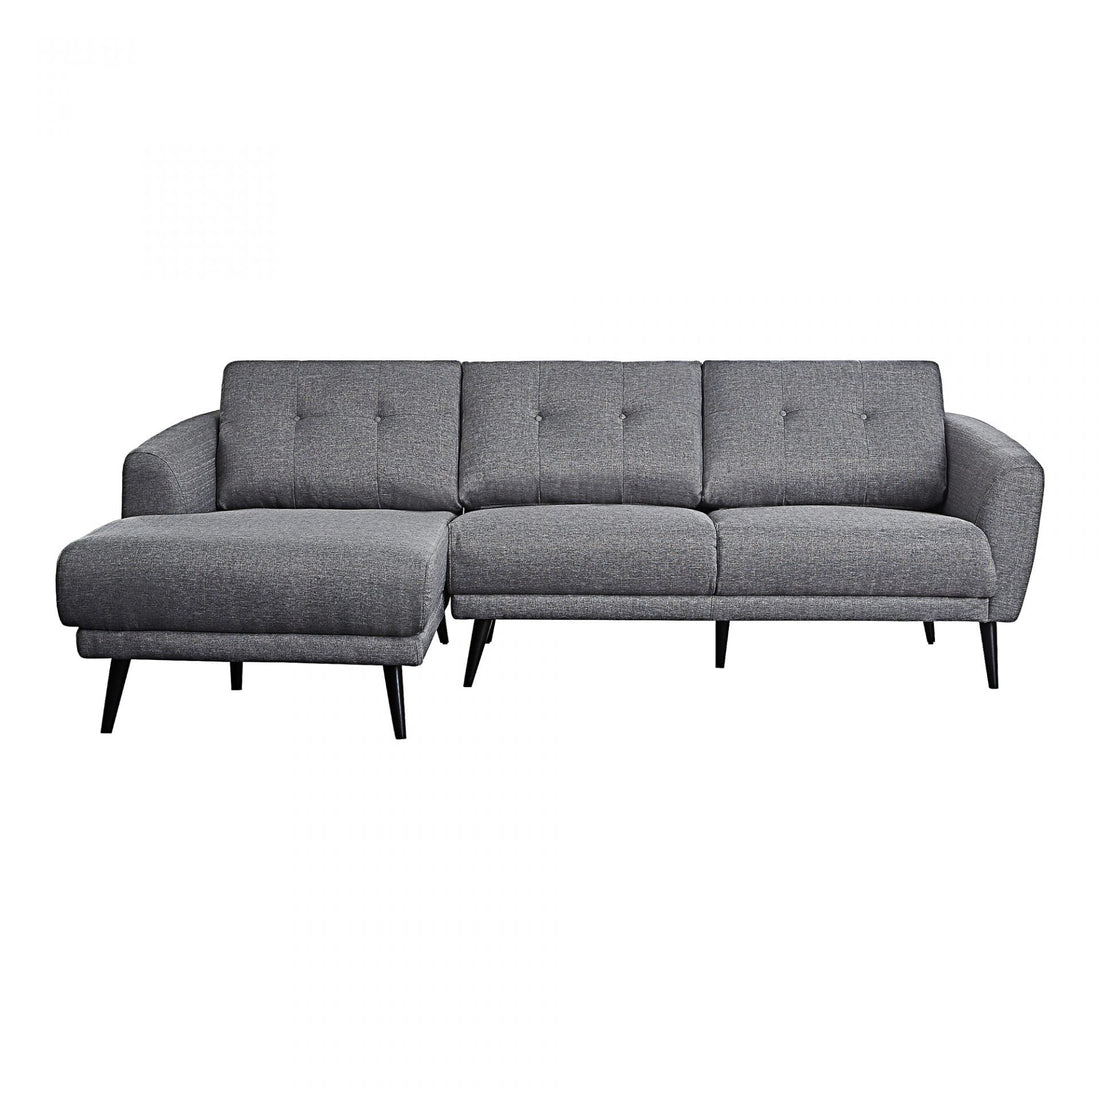 Sectional Gray: Contemporary Comfort in Gray